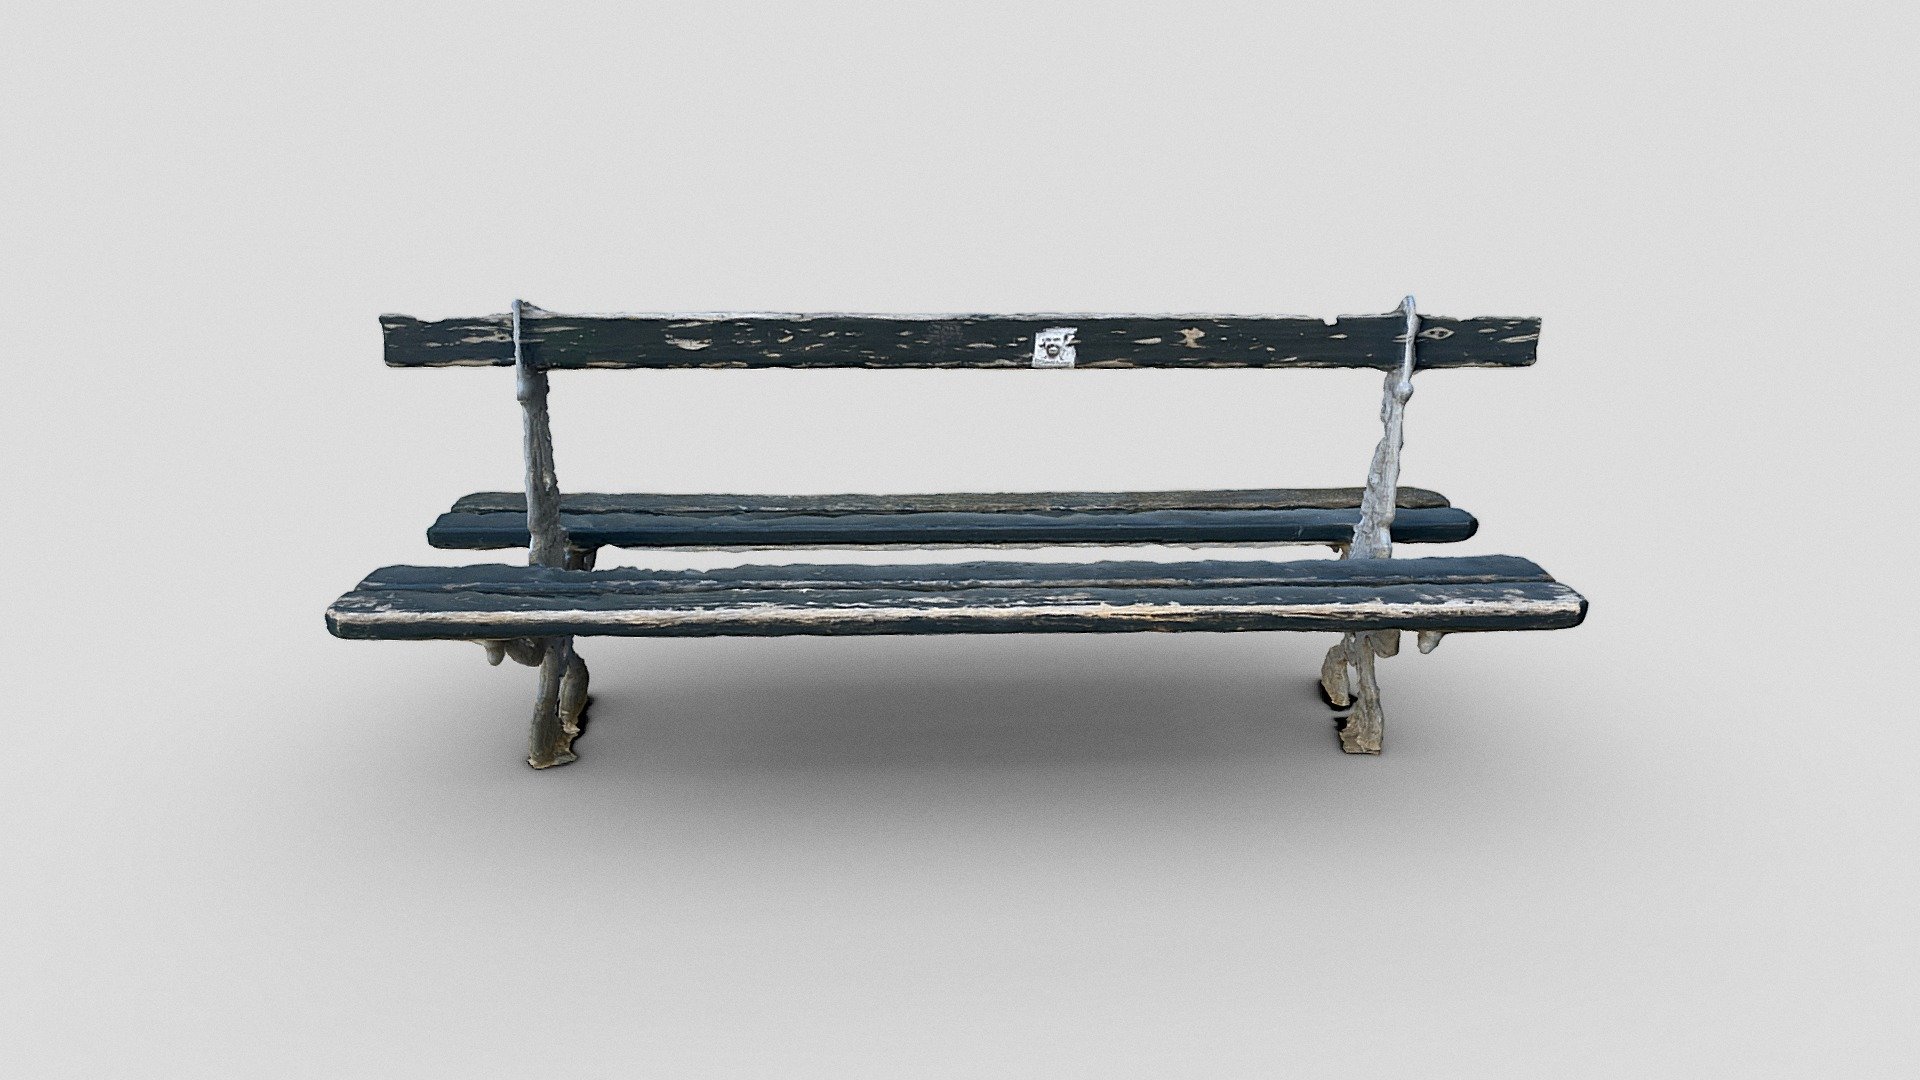 A typical bench from Paris, a landmark of Parisian urban landscape and architecture. There are around 100,000 of those in Paris.

https://frenchmoments.eu/benches-of-paris/ - Parisian public bench "Davioud" - Buy Royalty Free 3D model by alban 3d model